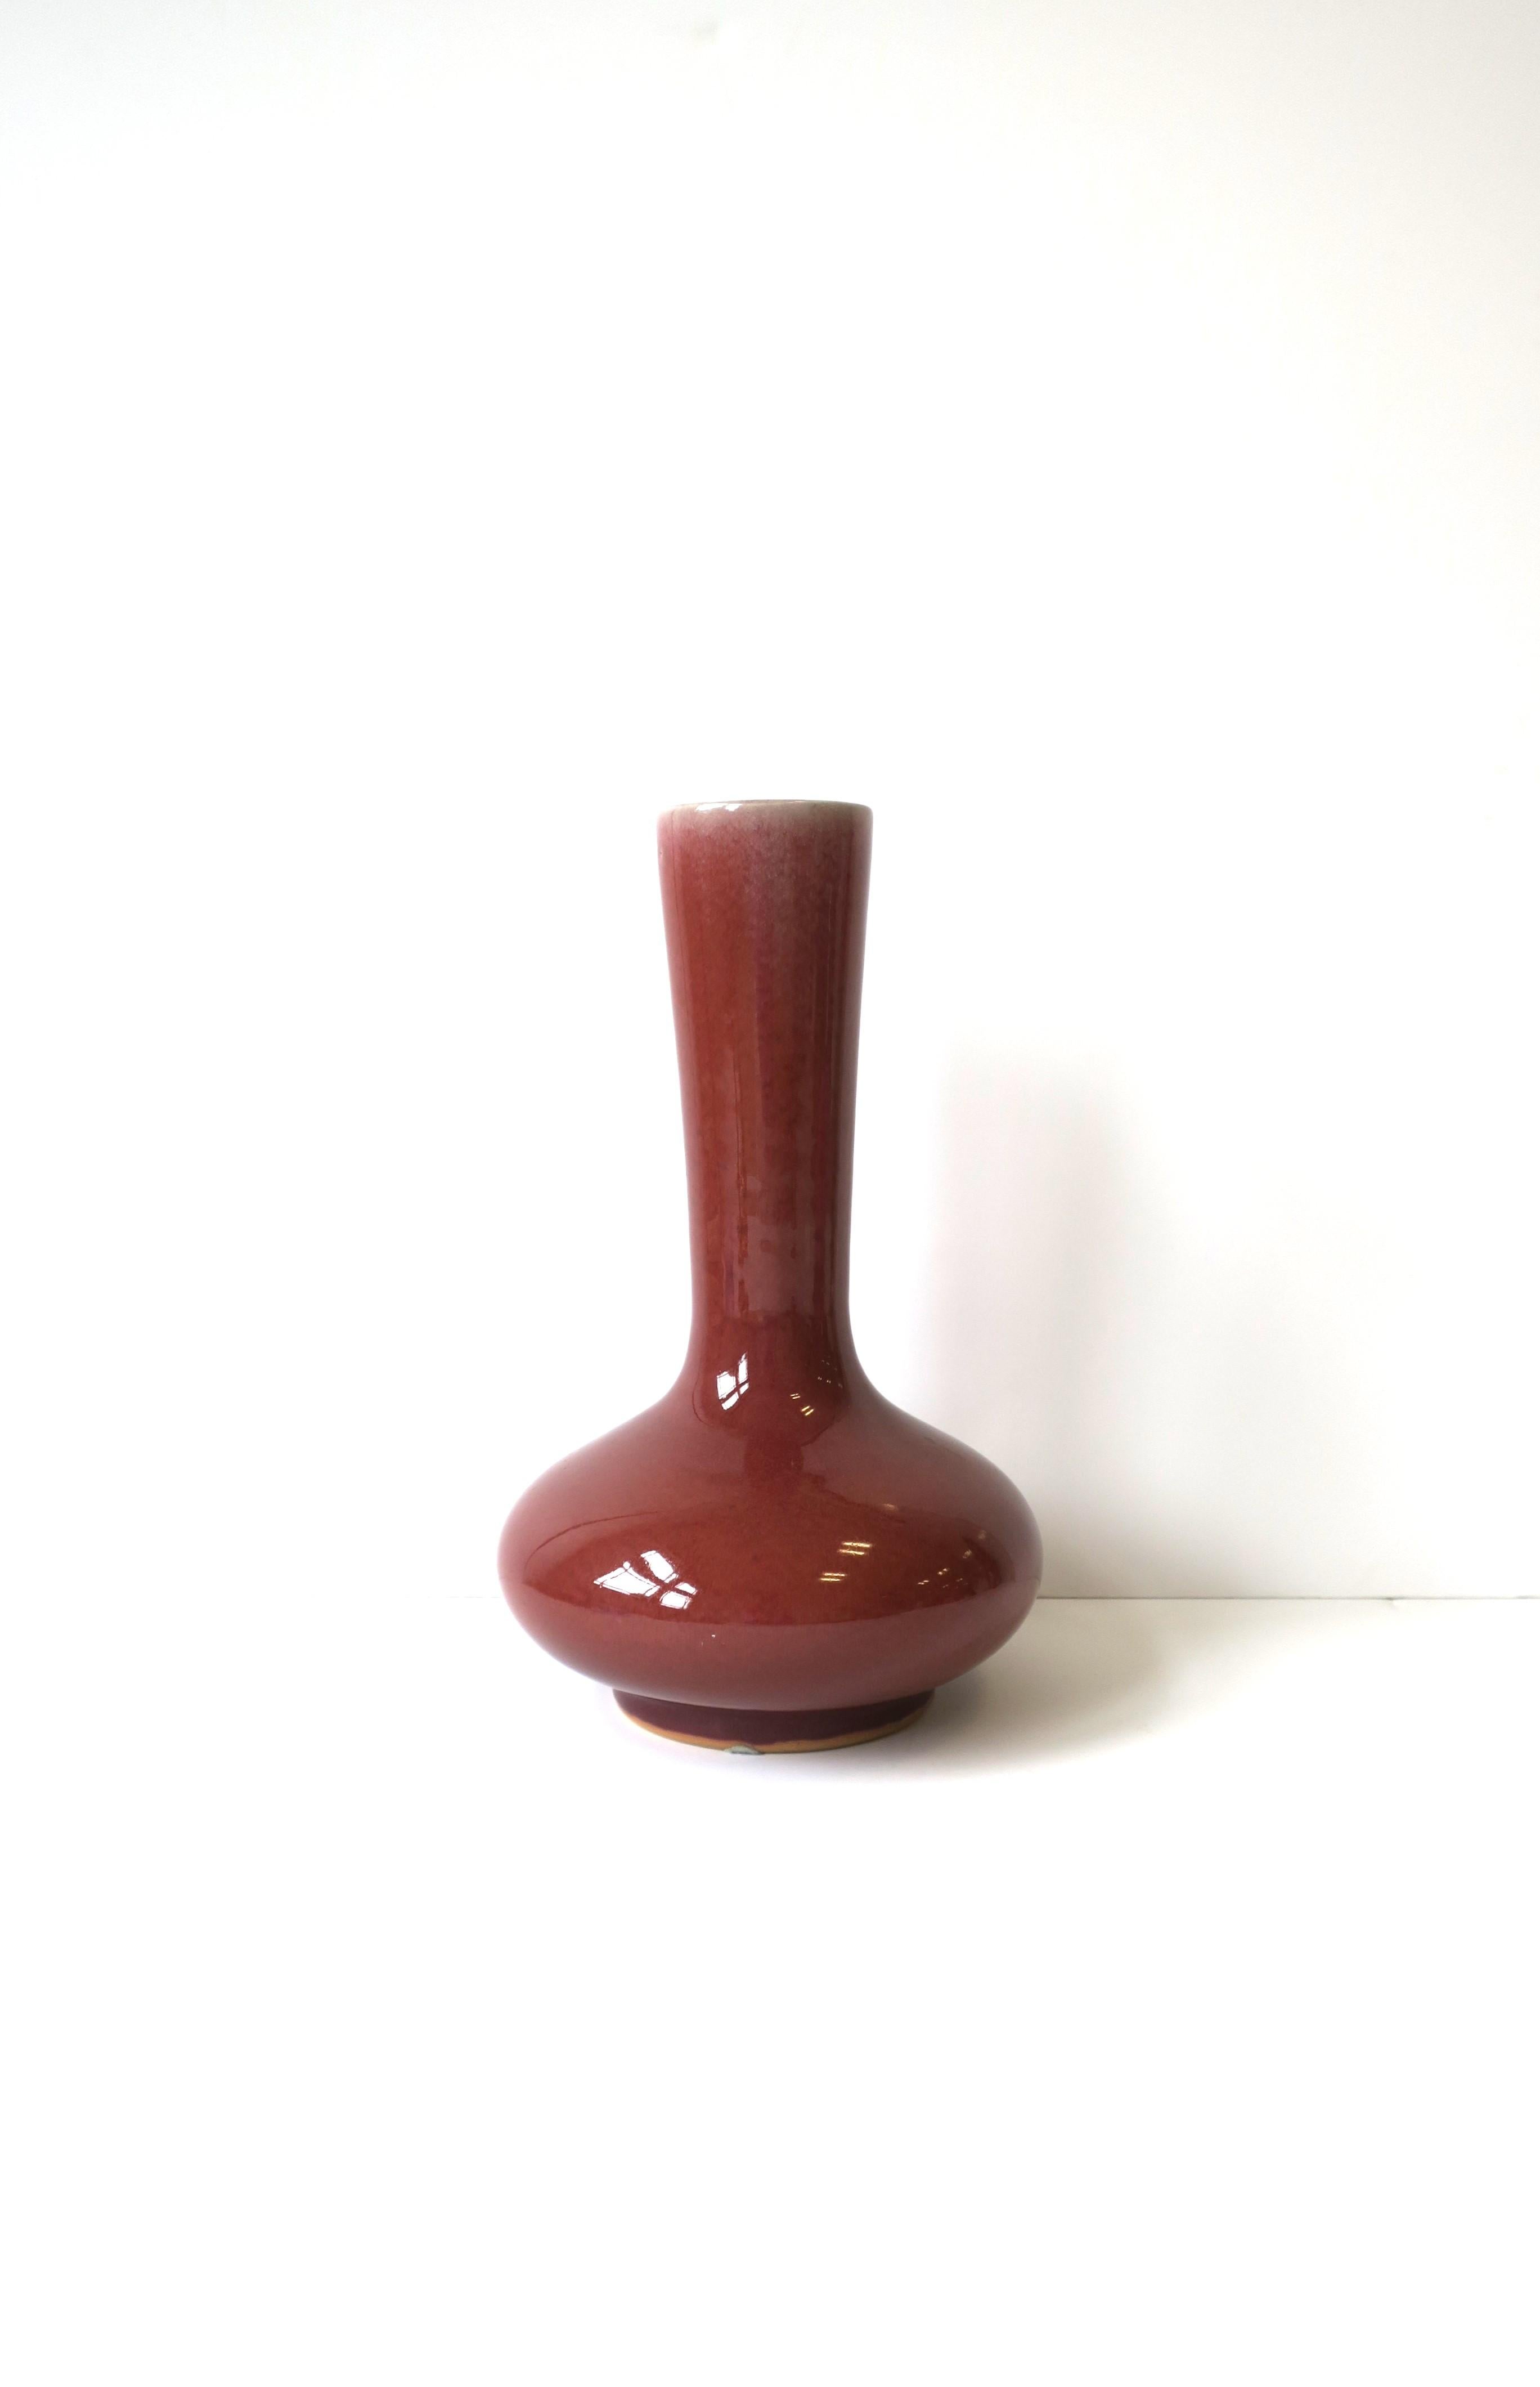 A red burgundy bulbous vase in the Chinese Asian style by designer Maitland-Smith, circa late-20th century, 1990s. Vase is hand-made ceramic pottery in a red burgundy hue with variegated design at top neck area. Piece has potters' stamp and markers'